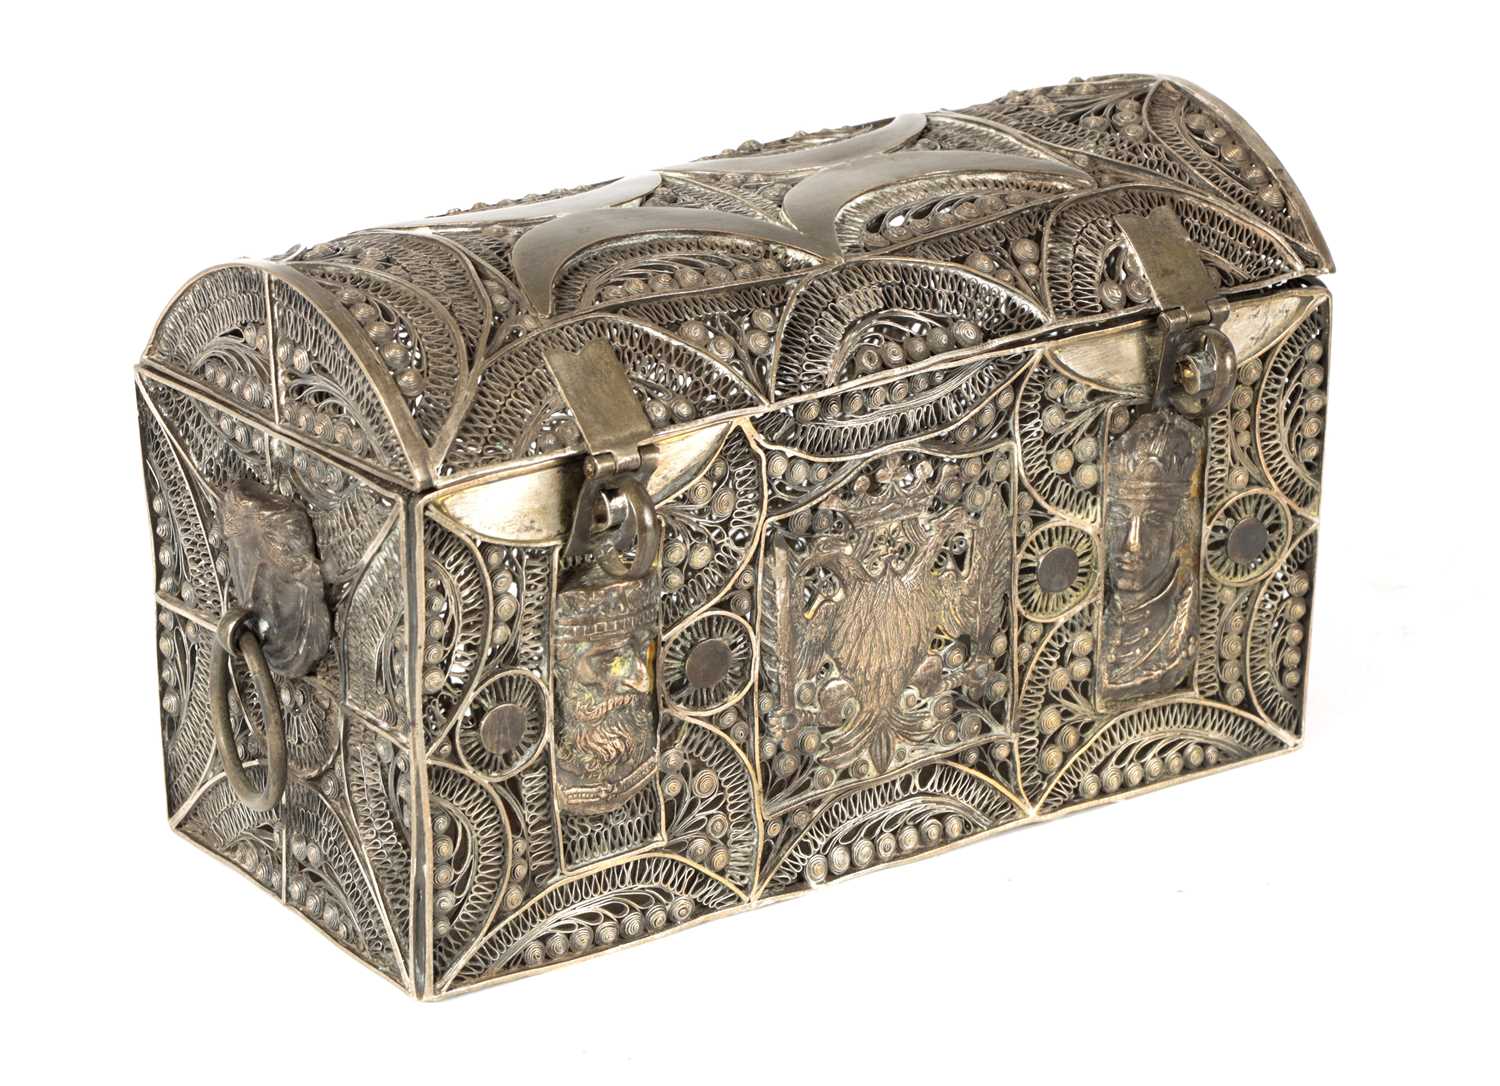 Lot 523 - A 19TH CENTURY RUSSIAN SILVERED METAL CASKET